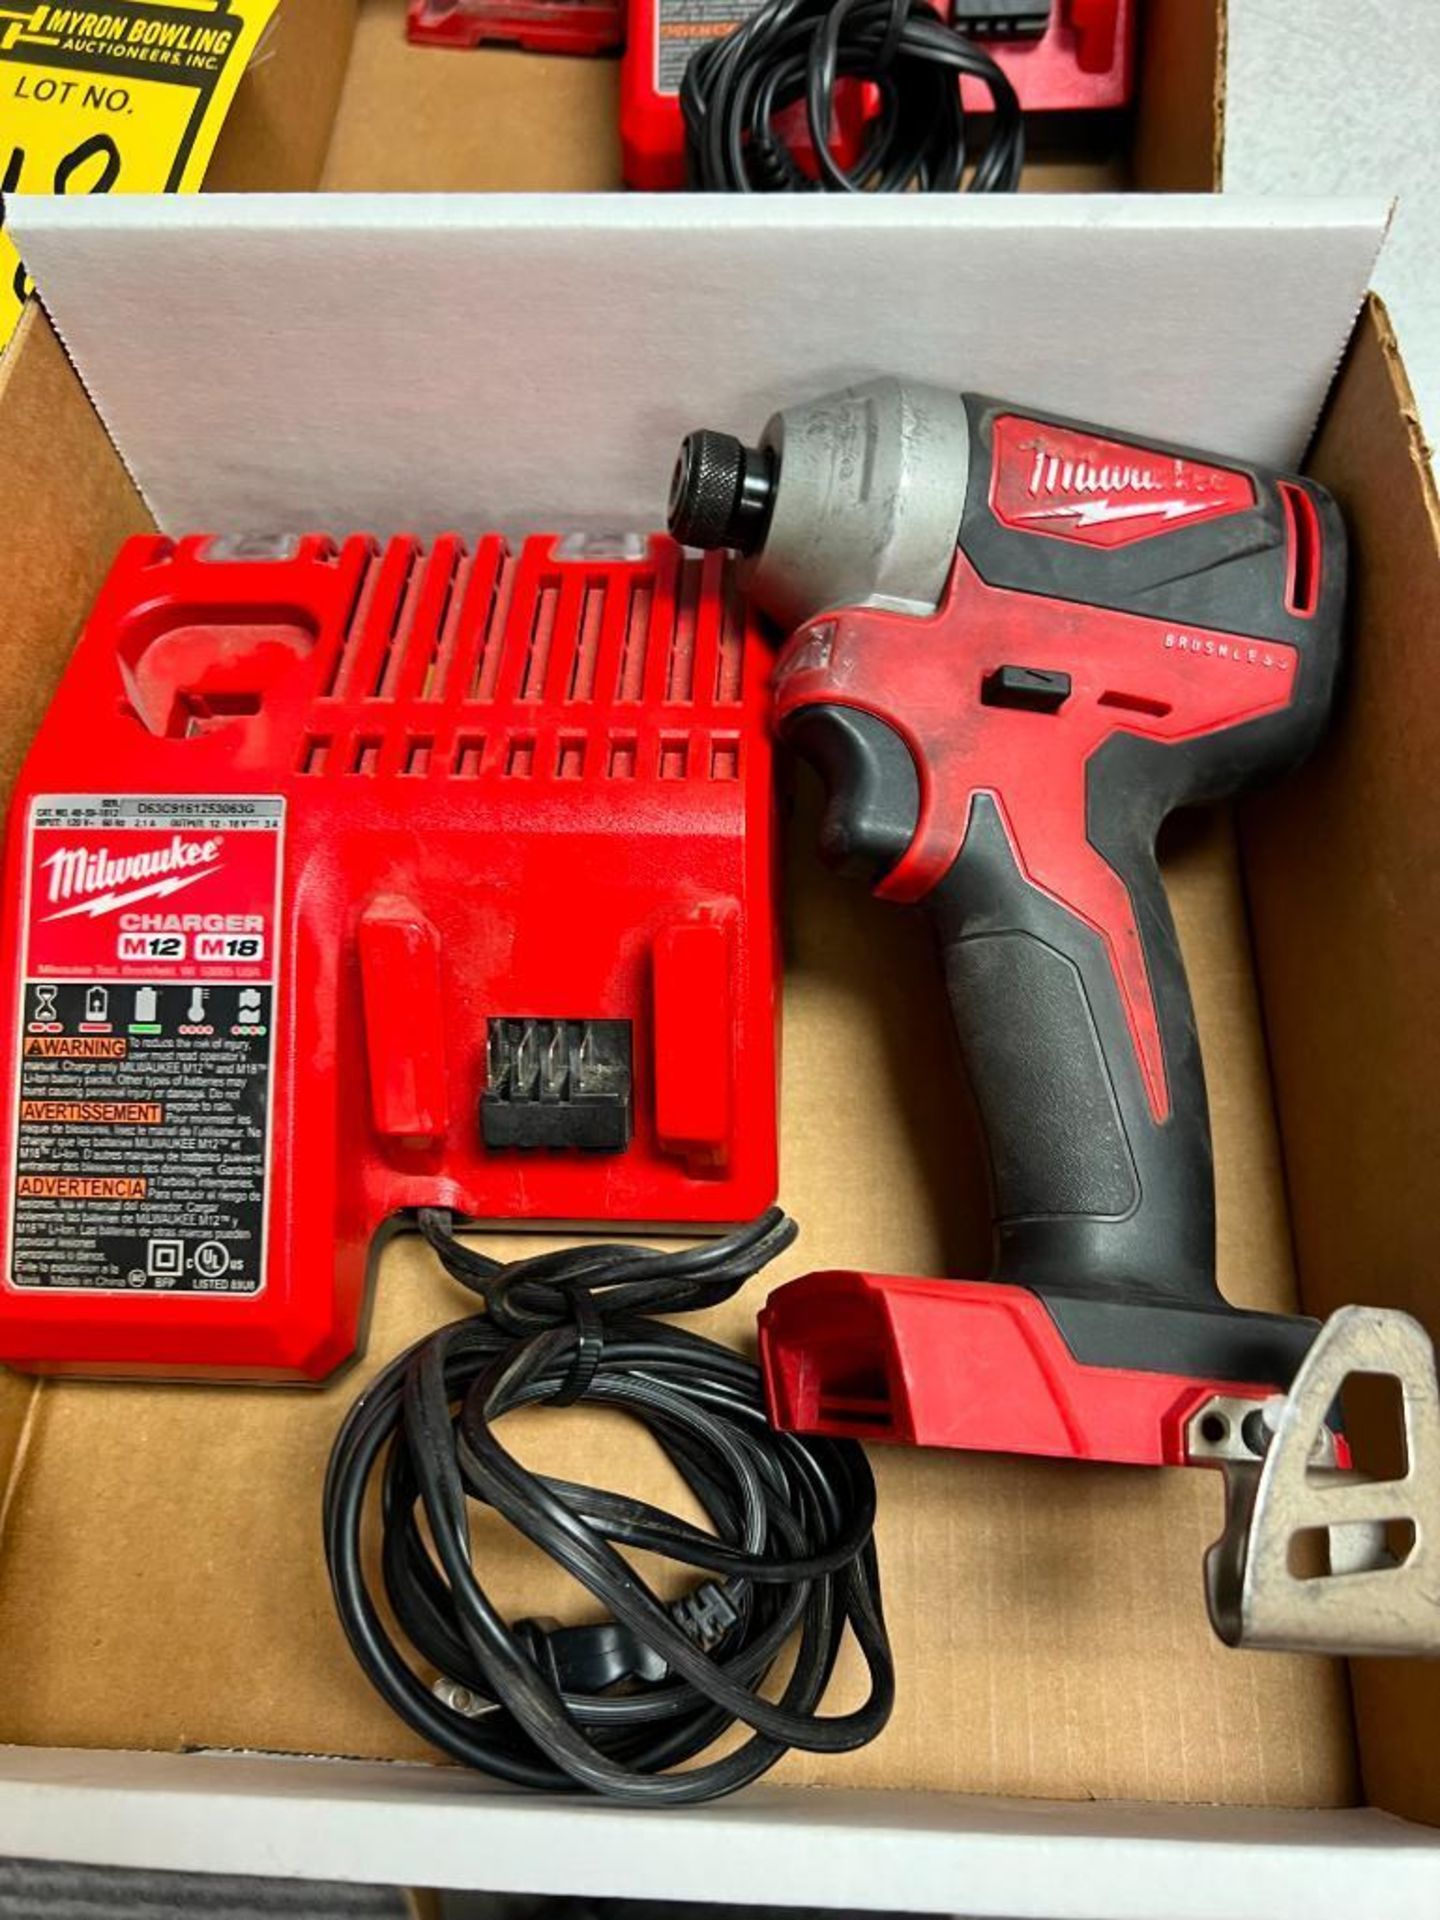 Milwaukee 18 Volt Cordless Impact Driver w/ Charger (No Battery) - Image 2 of 3